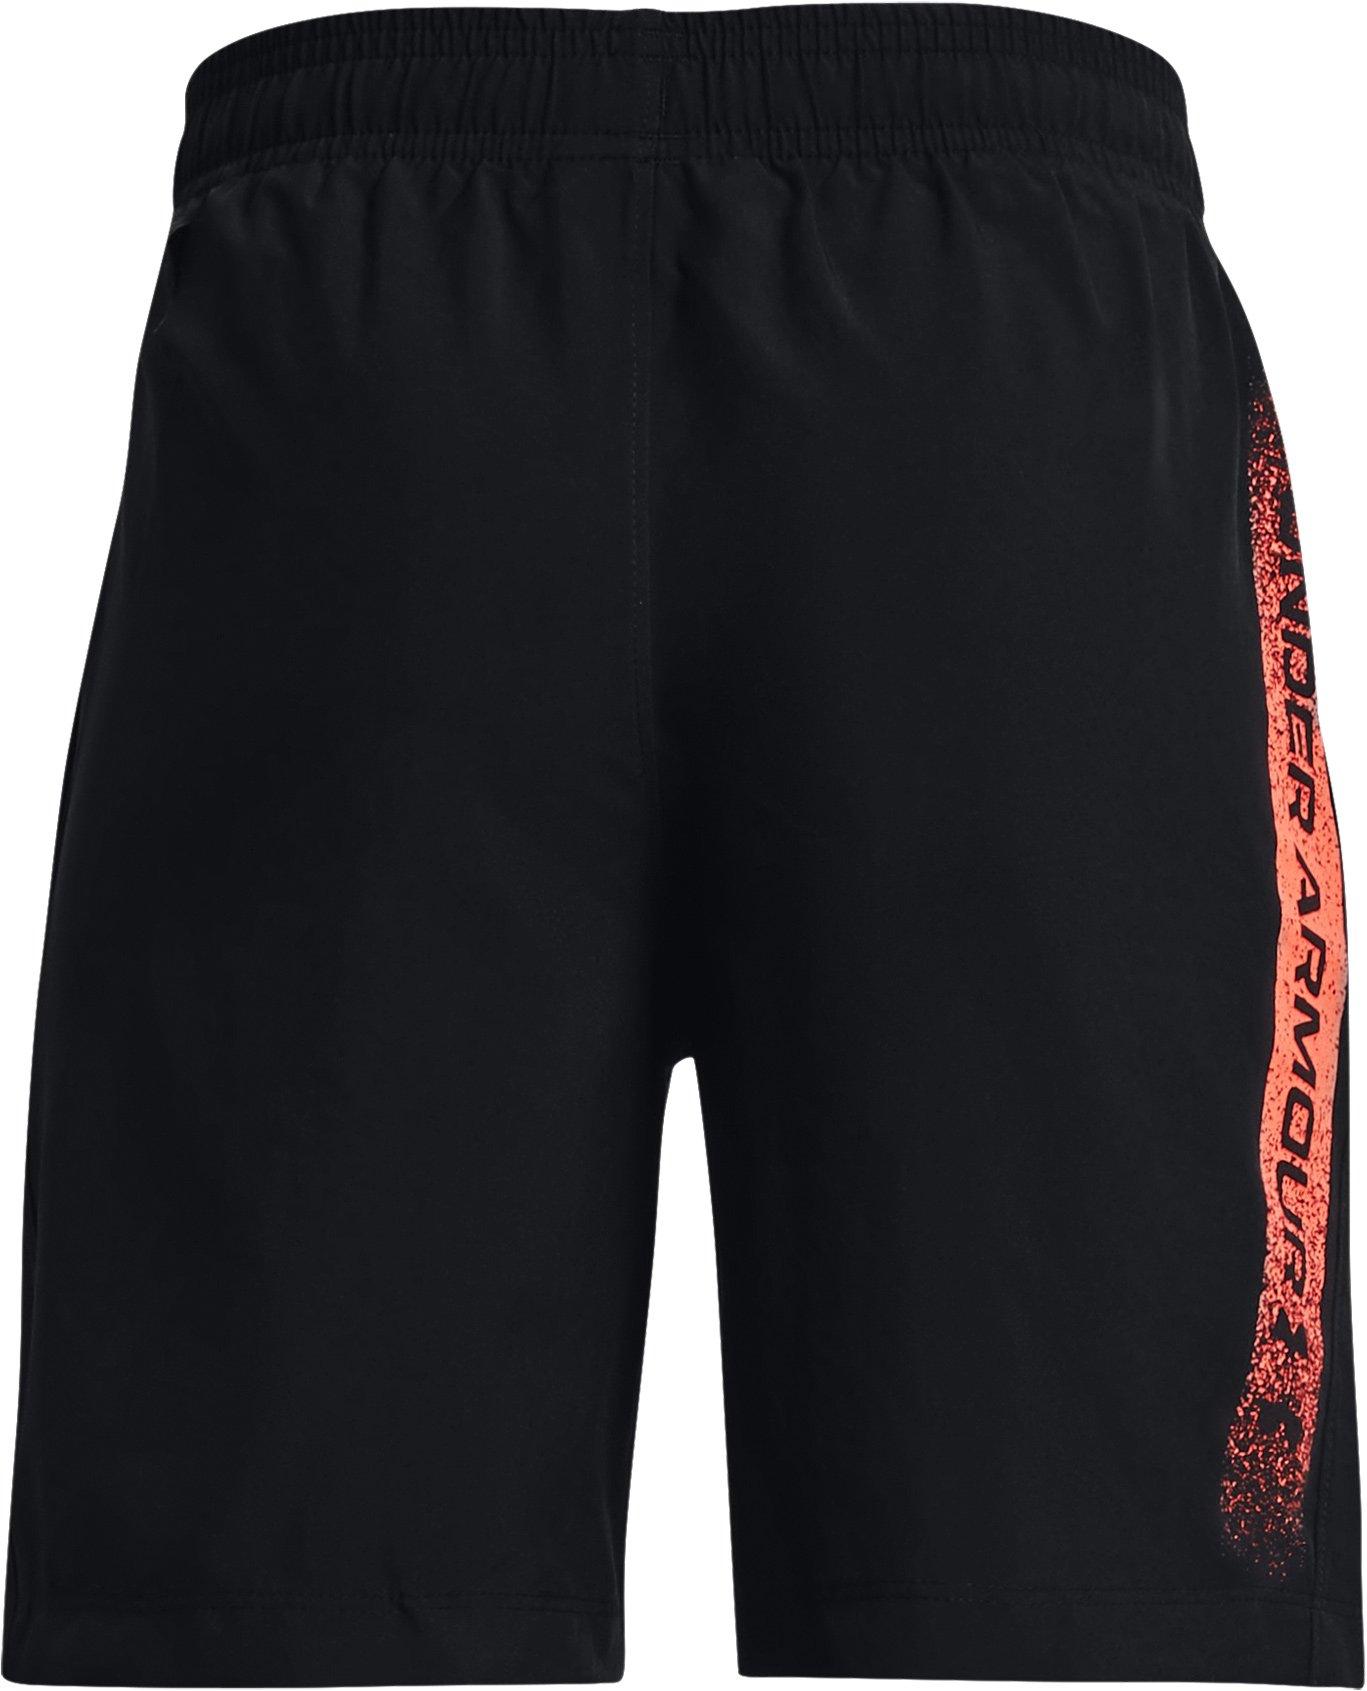 Under Armour Woven Graphic Shorts-BLK M